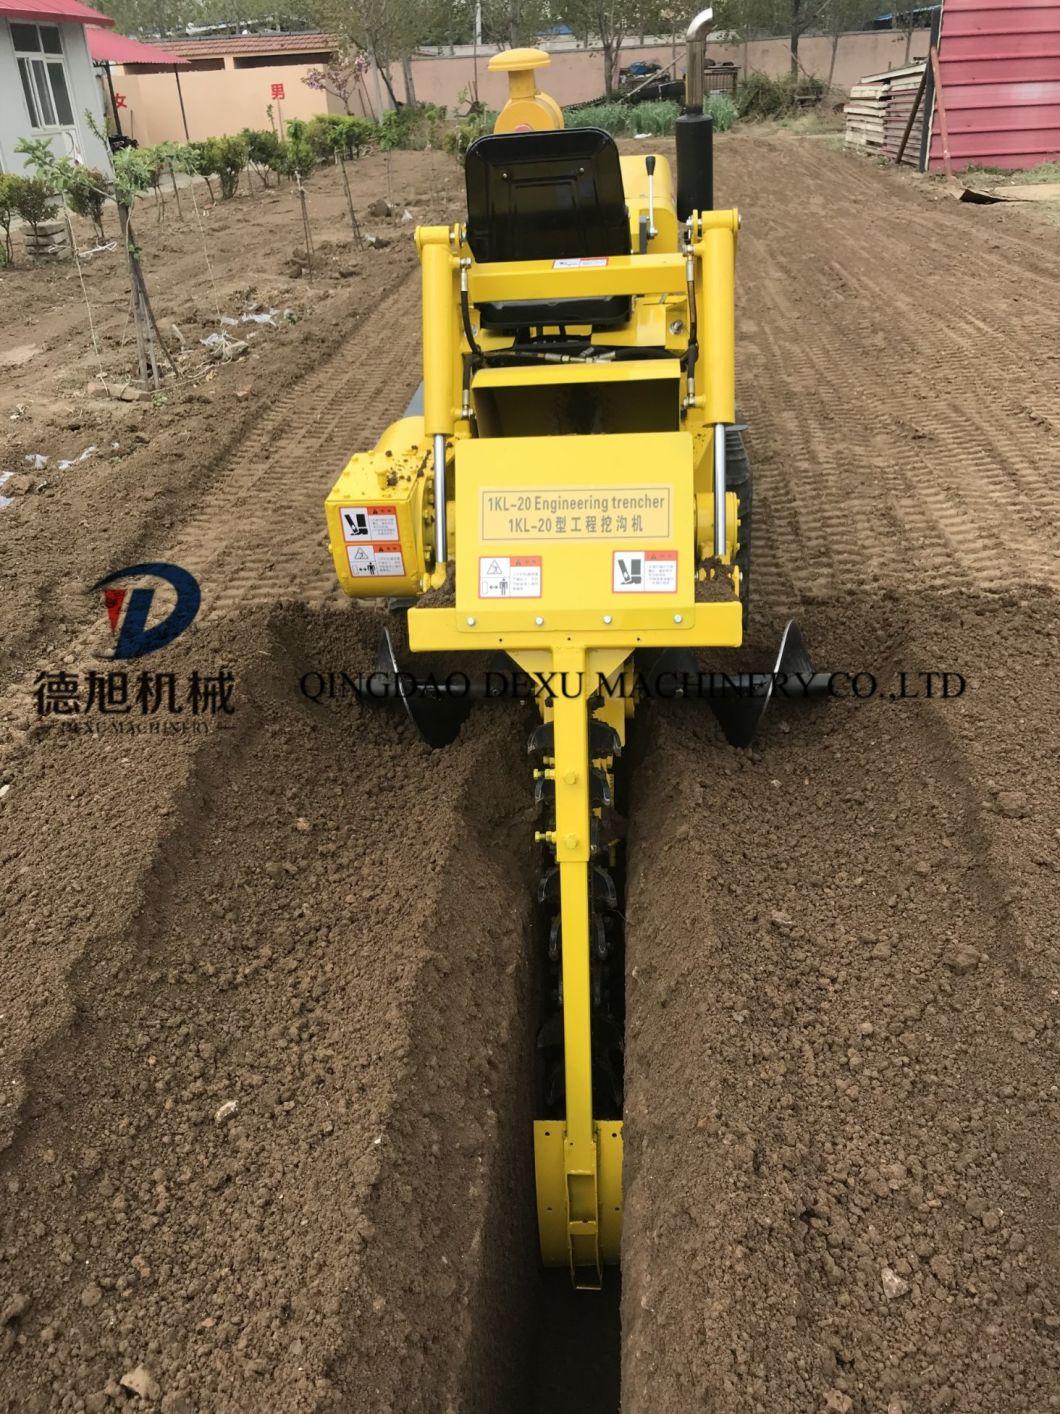 Directly Offer Mini Tractor Trencher/Portable Mini Trencher